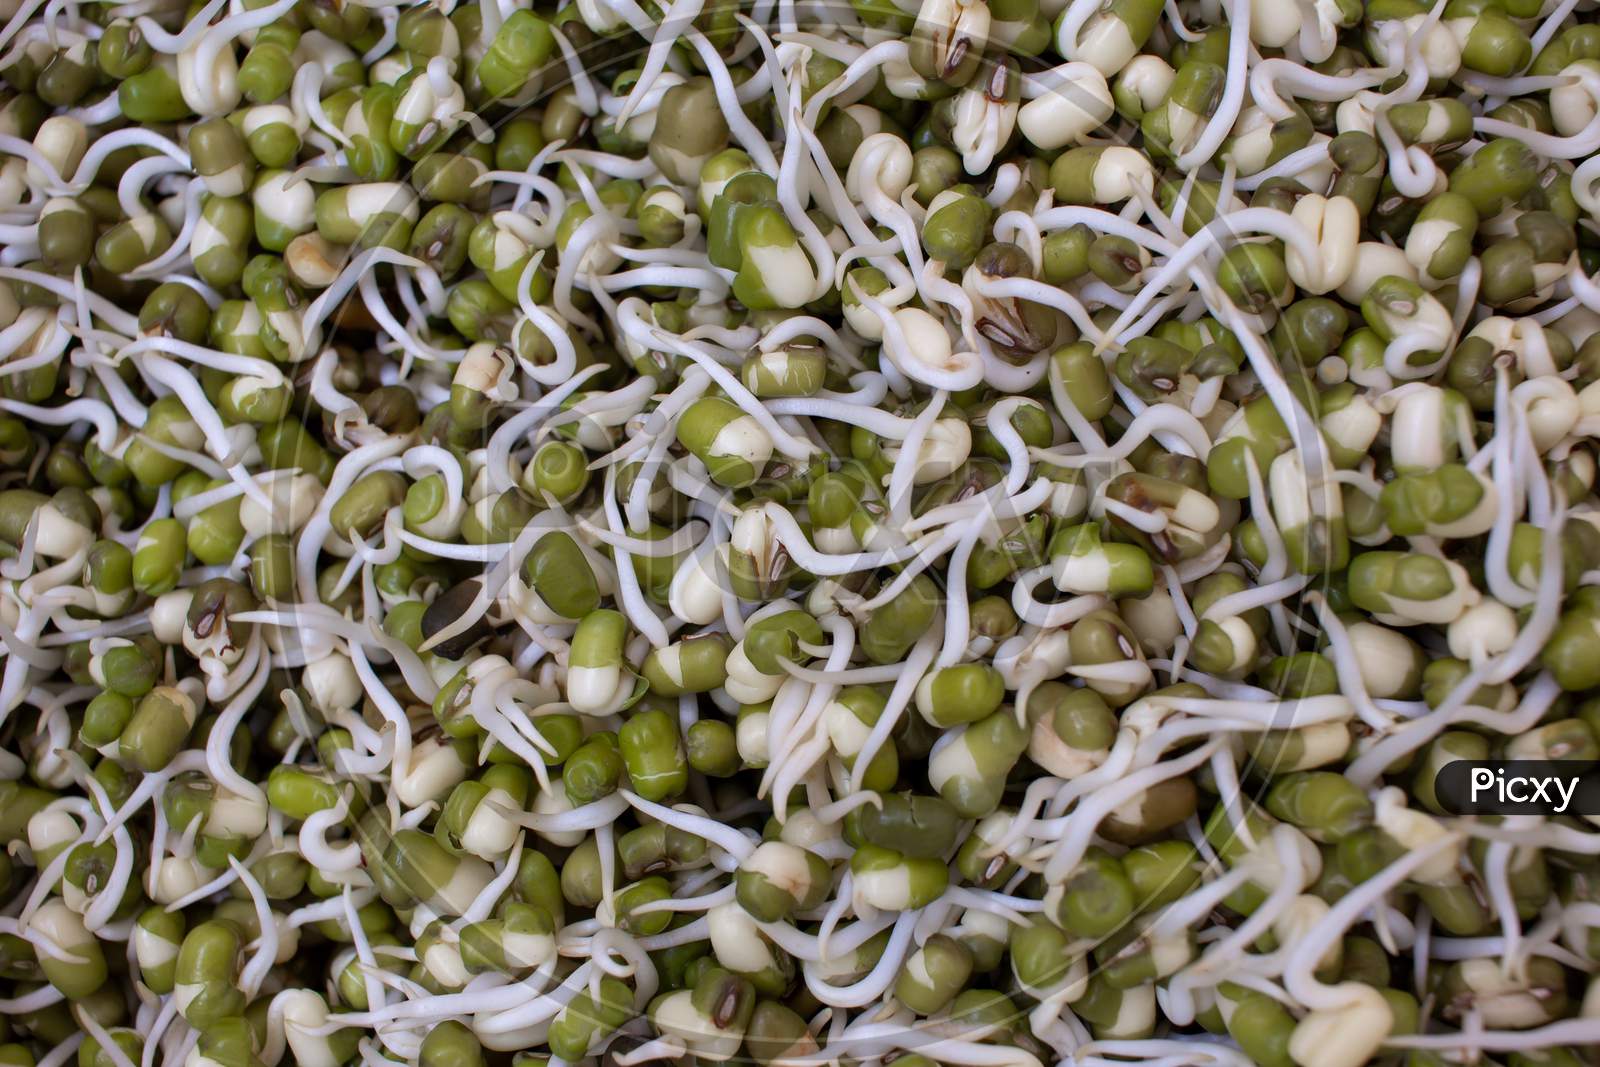 View Of The Green Gram Sprouts. Germination Of Mung Beans Which Is A Healthy Food